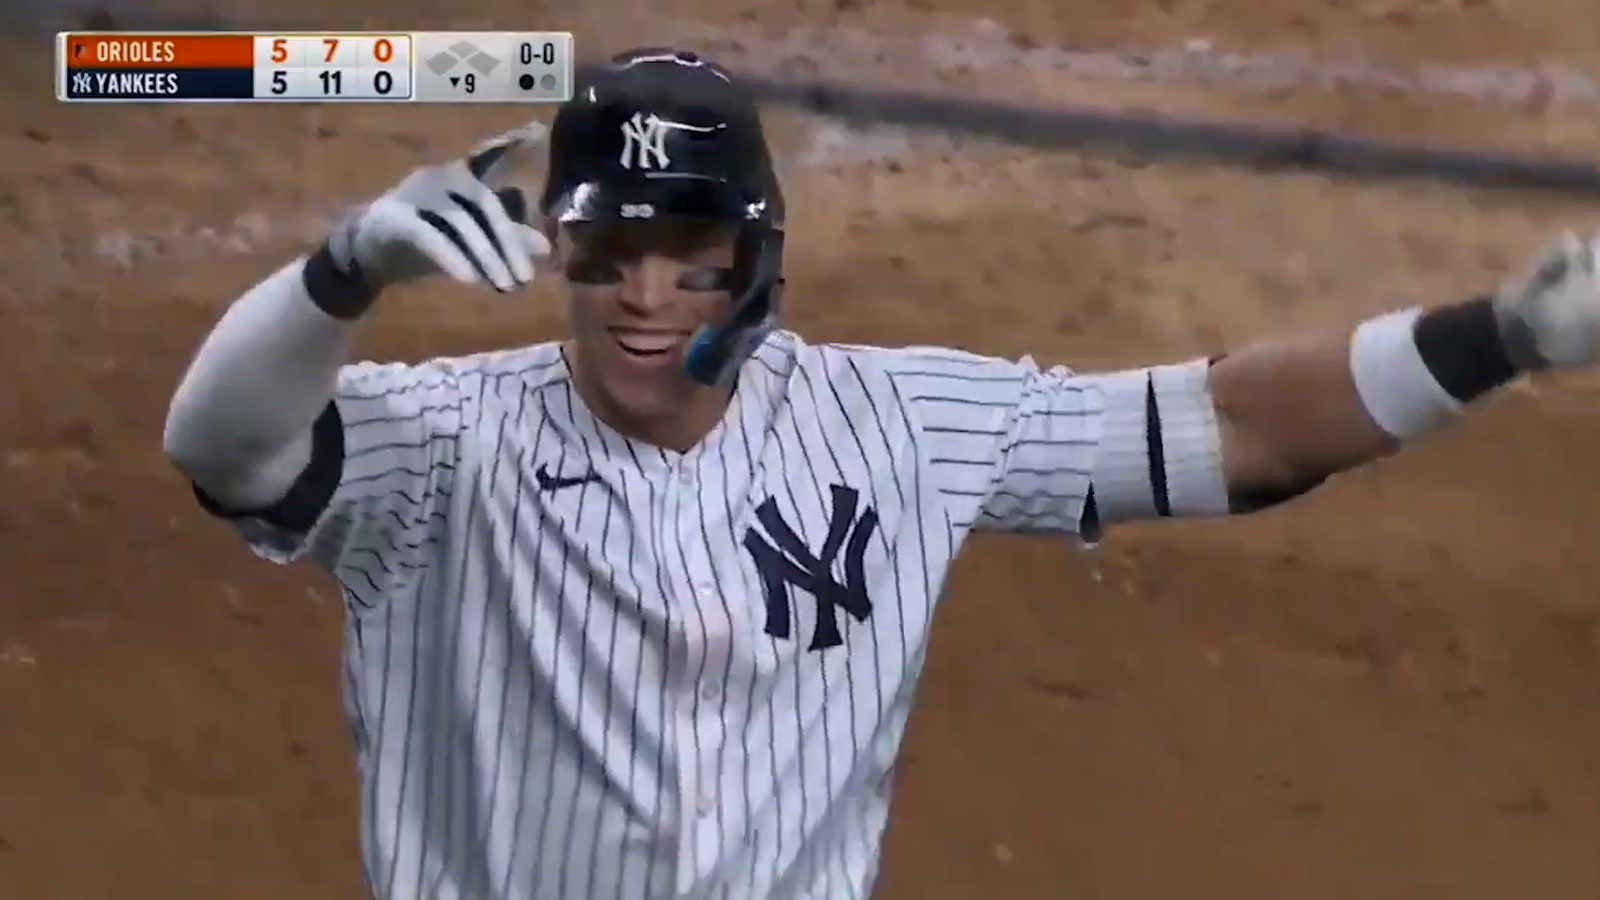 Aaron Judge of the Yankees hits a solo home run to tie the game against the Orioles